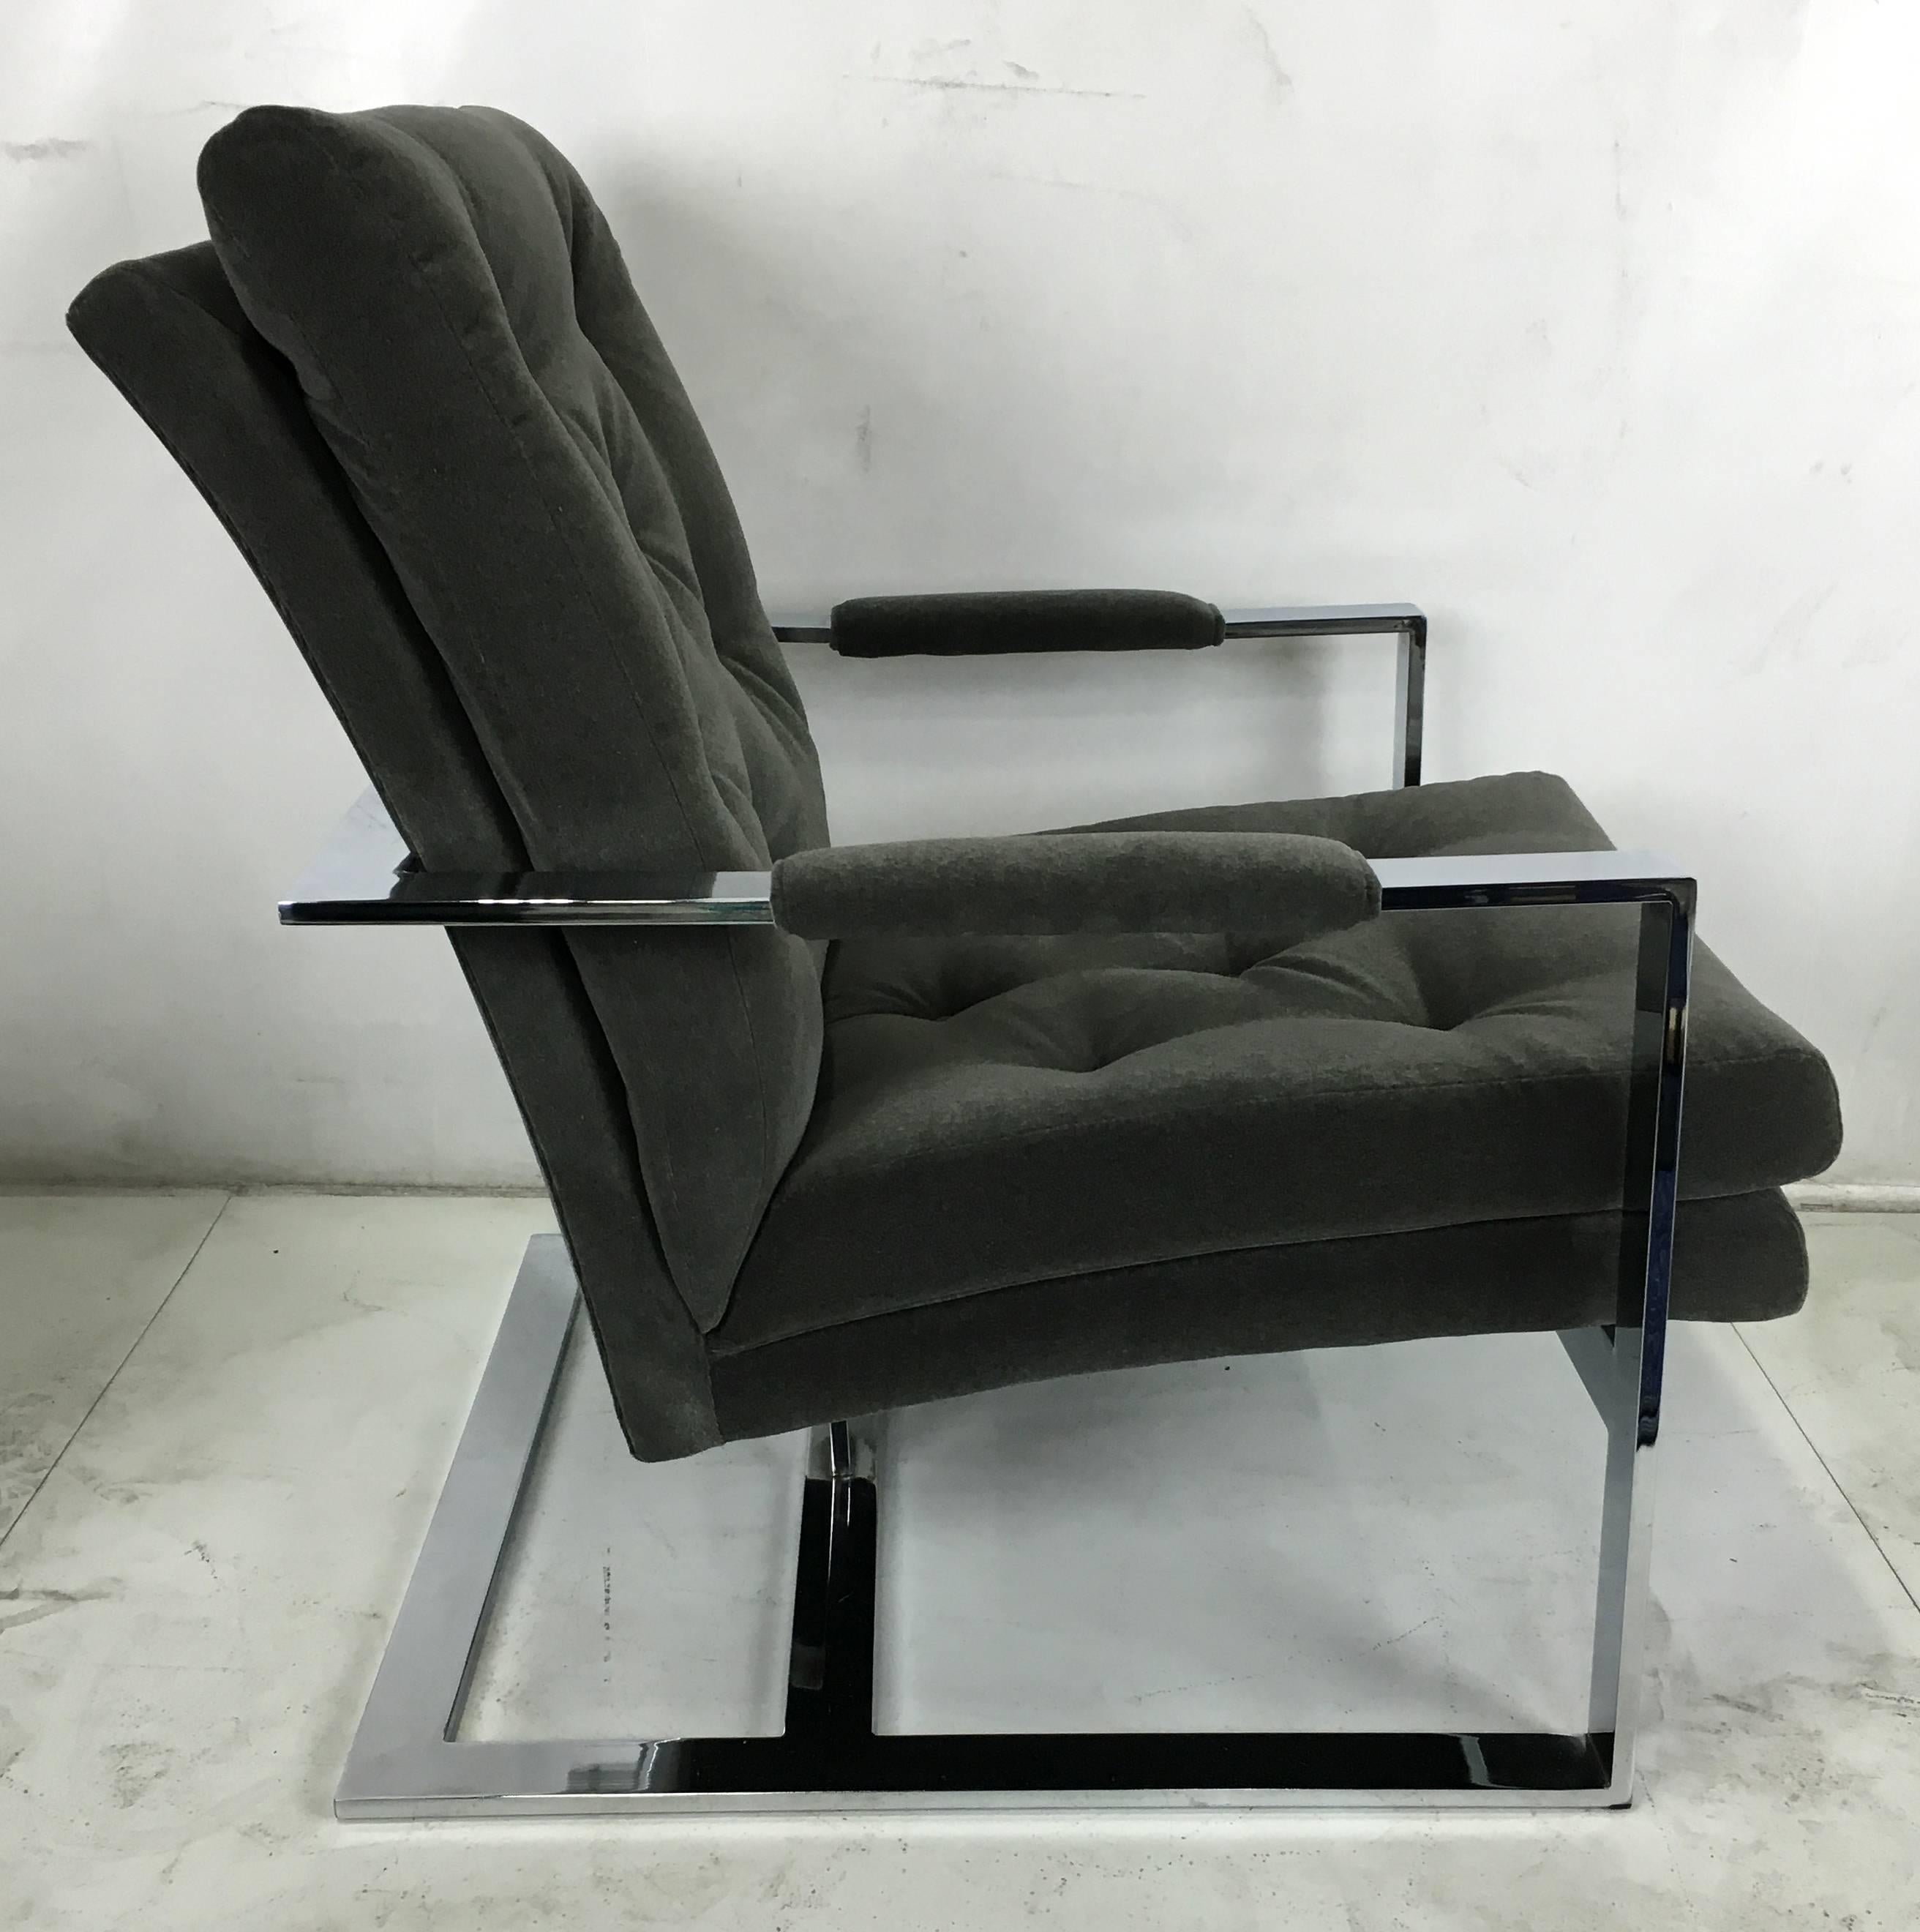 Pair of Rare Cantilevered Lounge Chairs by Milo Baughman (amerikanisch)